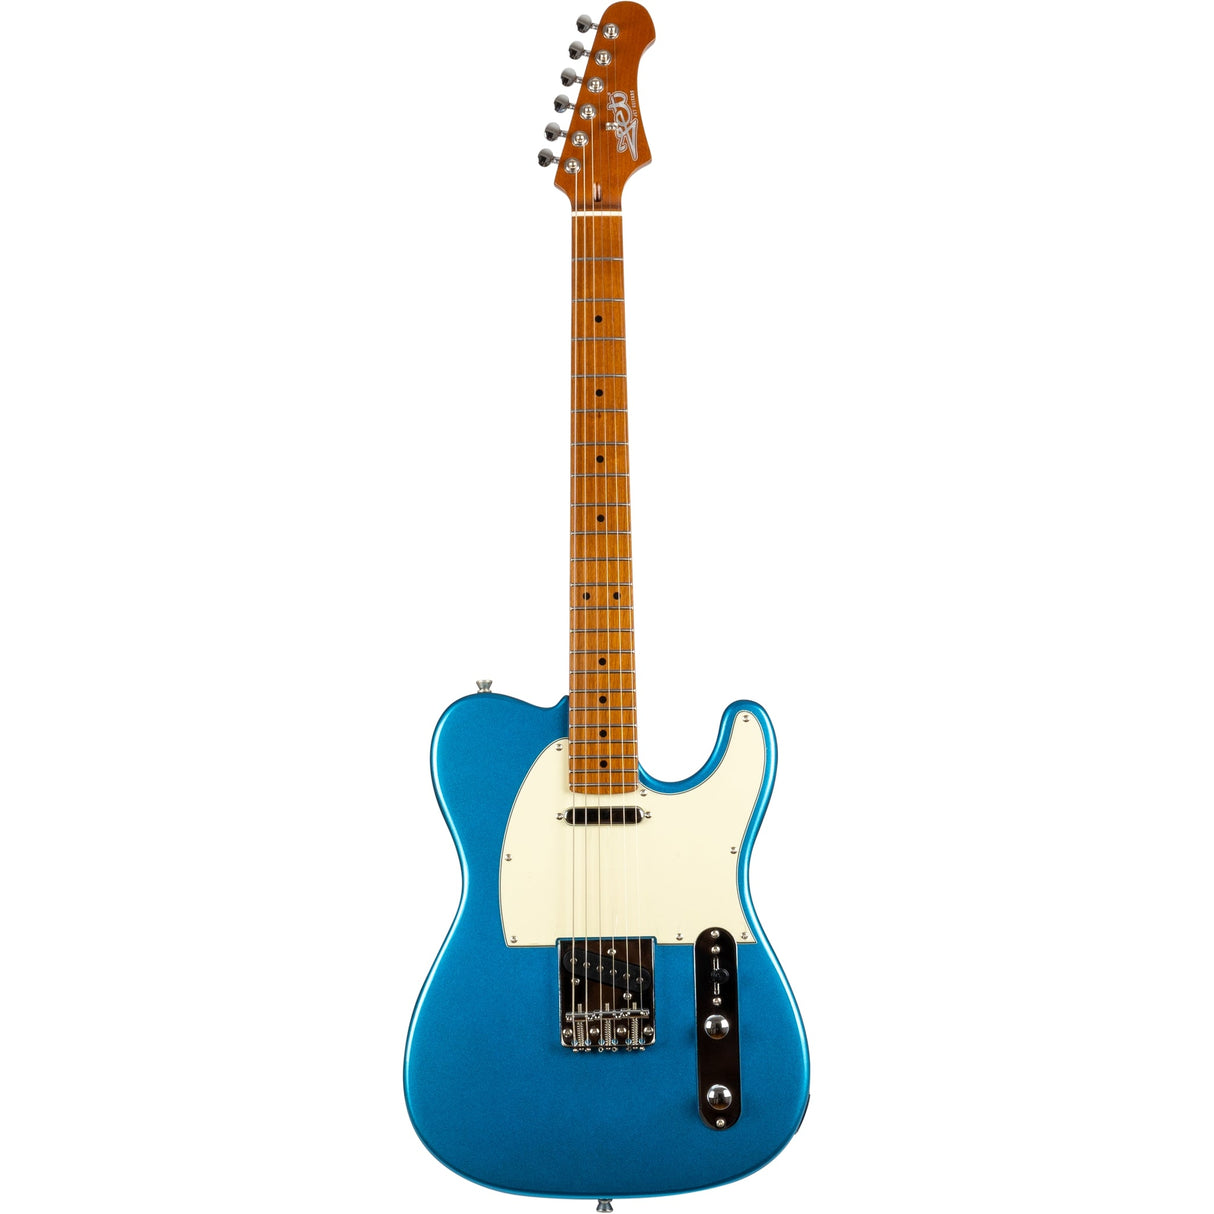 Jet Guitars JT-300 Canadian Roasted Maple Basswood Electric Guitar with SS Ceramic Pickup, Lake Placid Blue